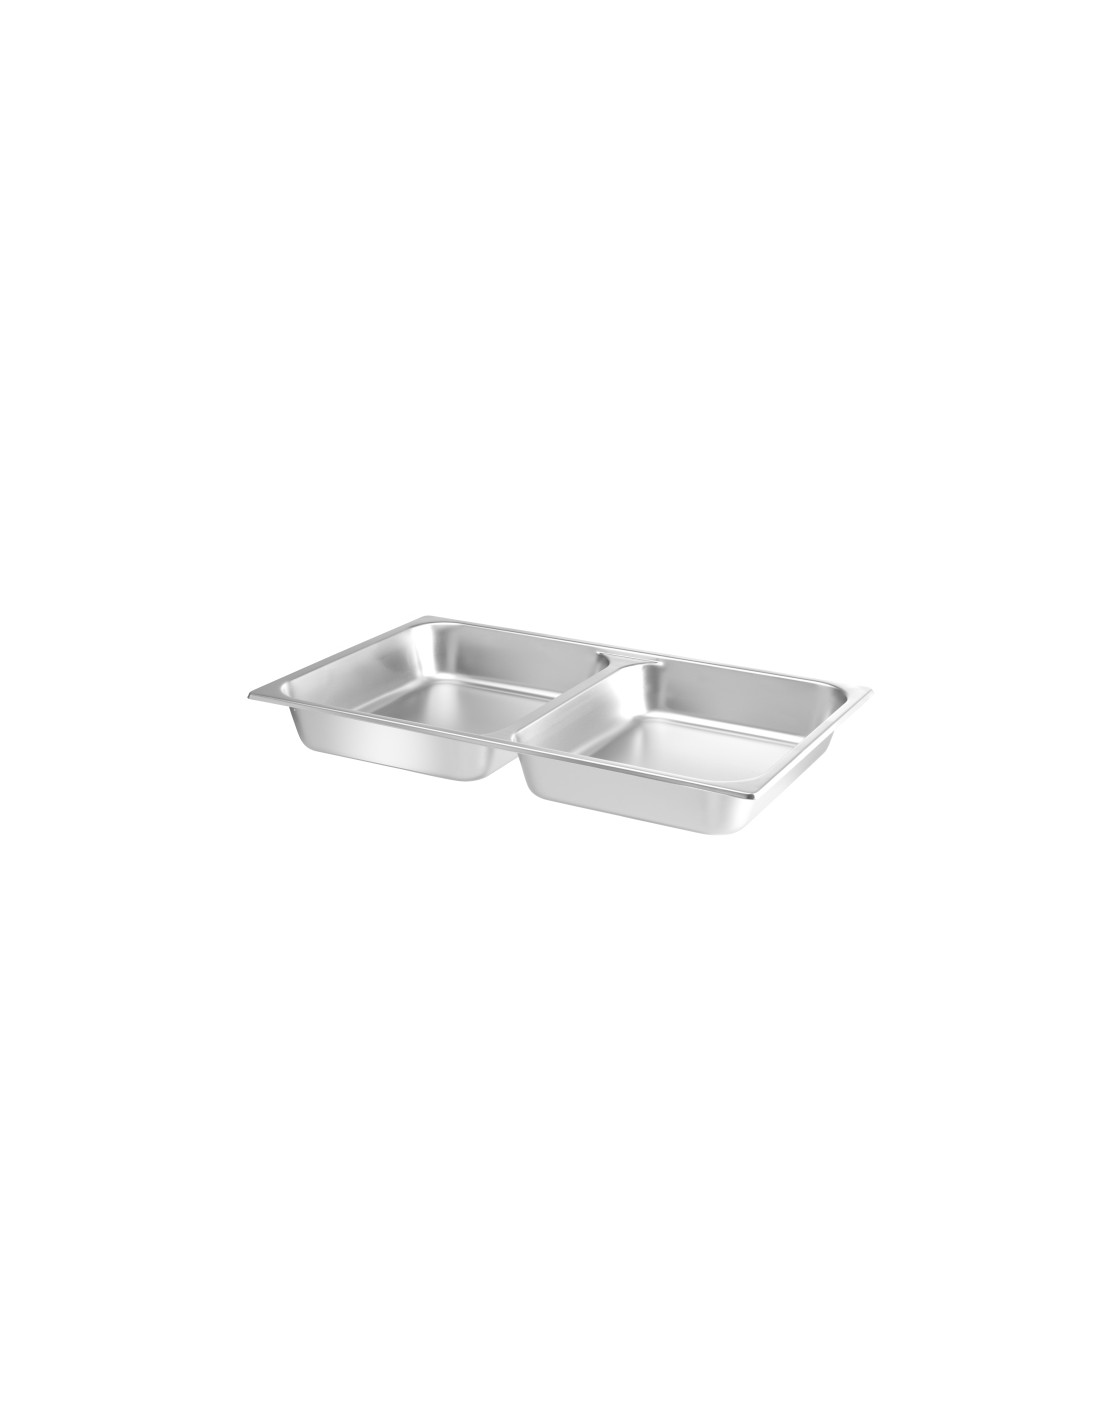 GN 1/1 tray with 2 compartments - mm 530 x 325 x 65 h